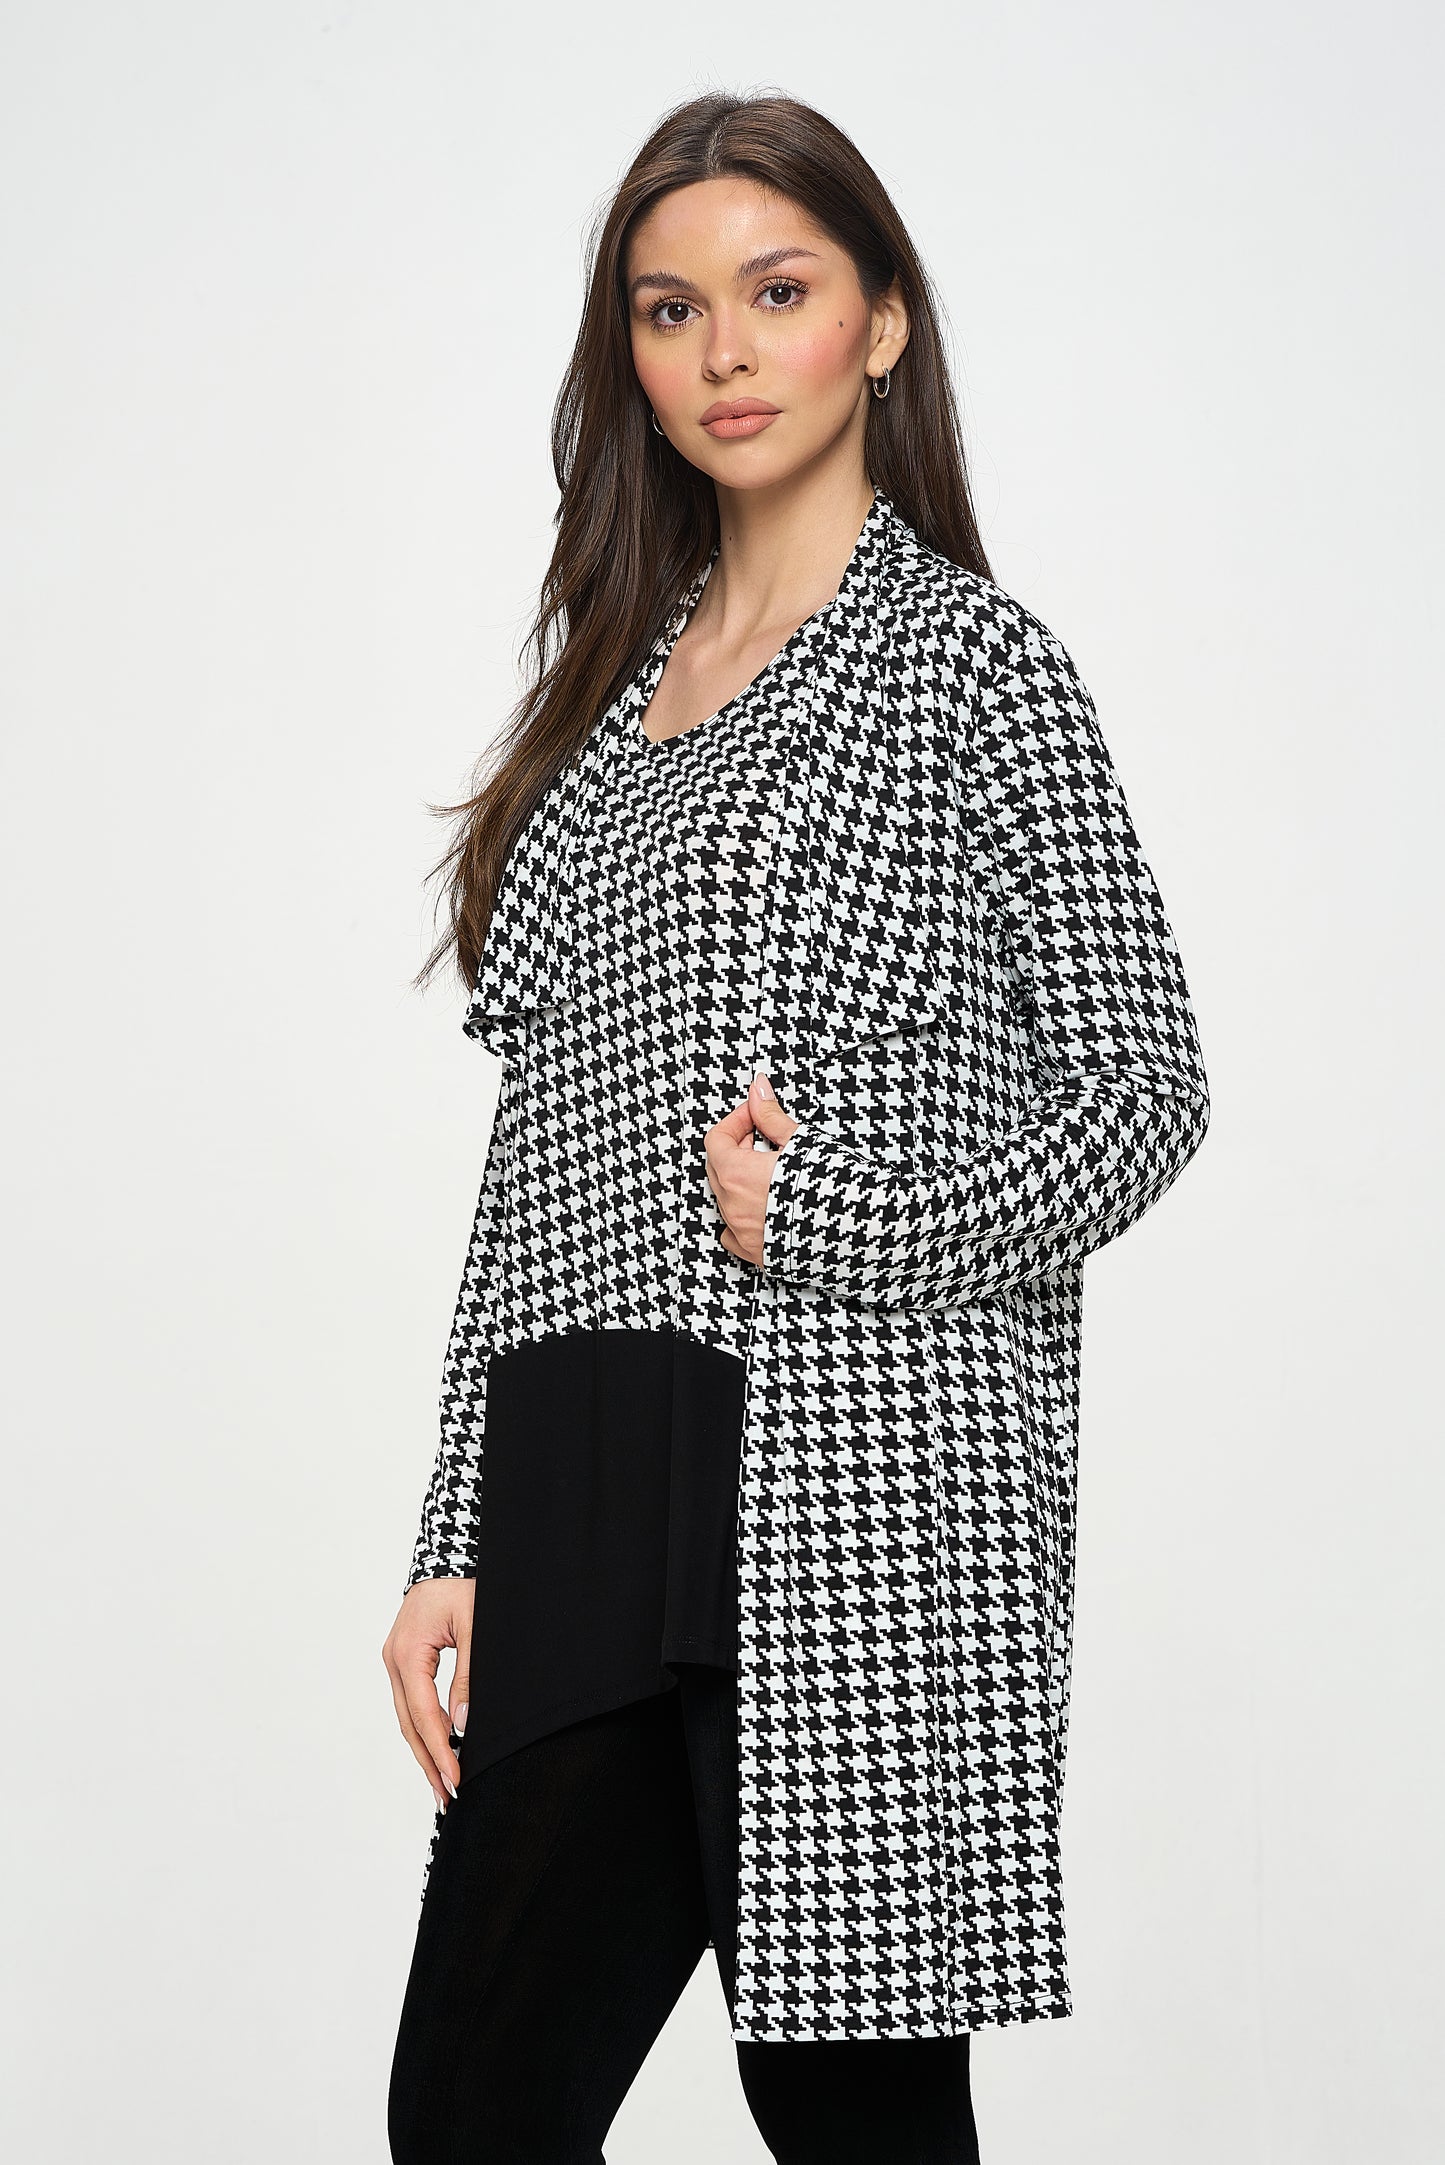 ITY Houndstooth Print Cardigan-4088HT-LRP1-W410